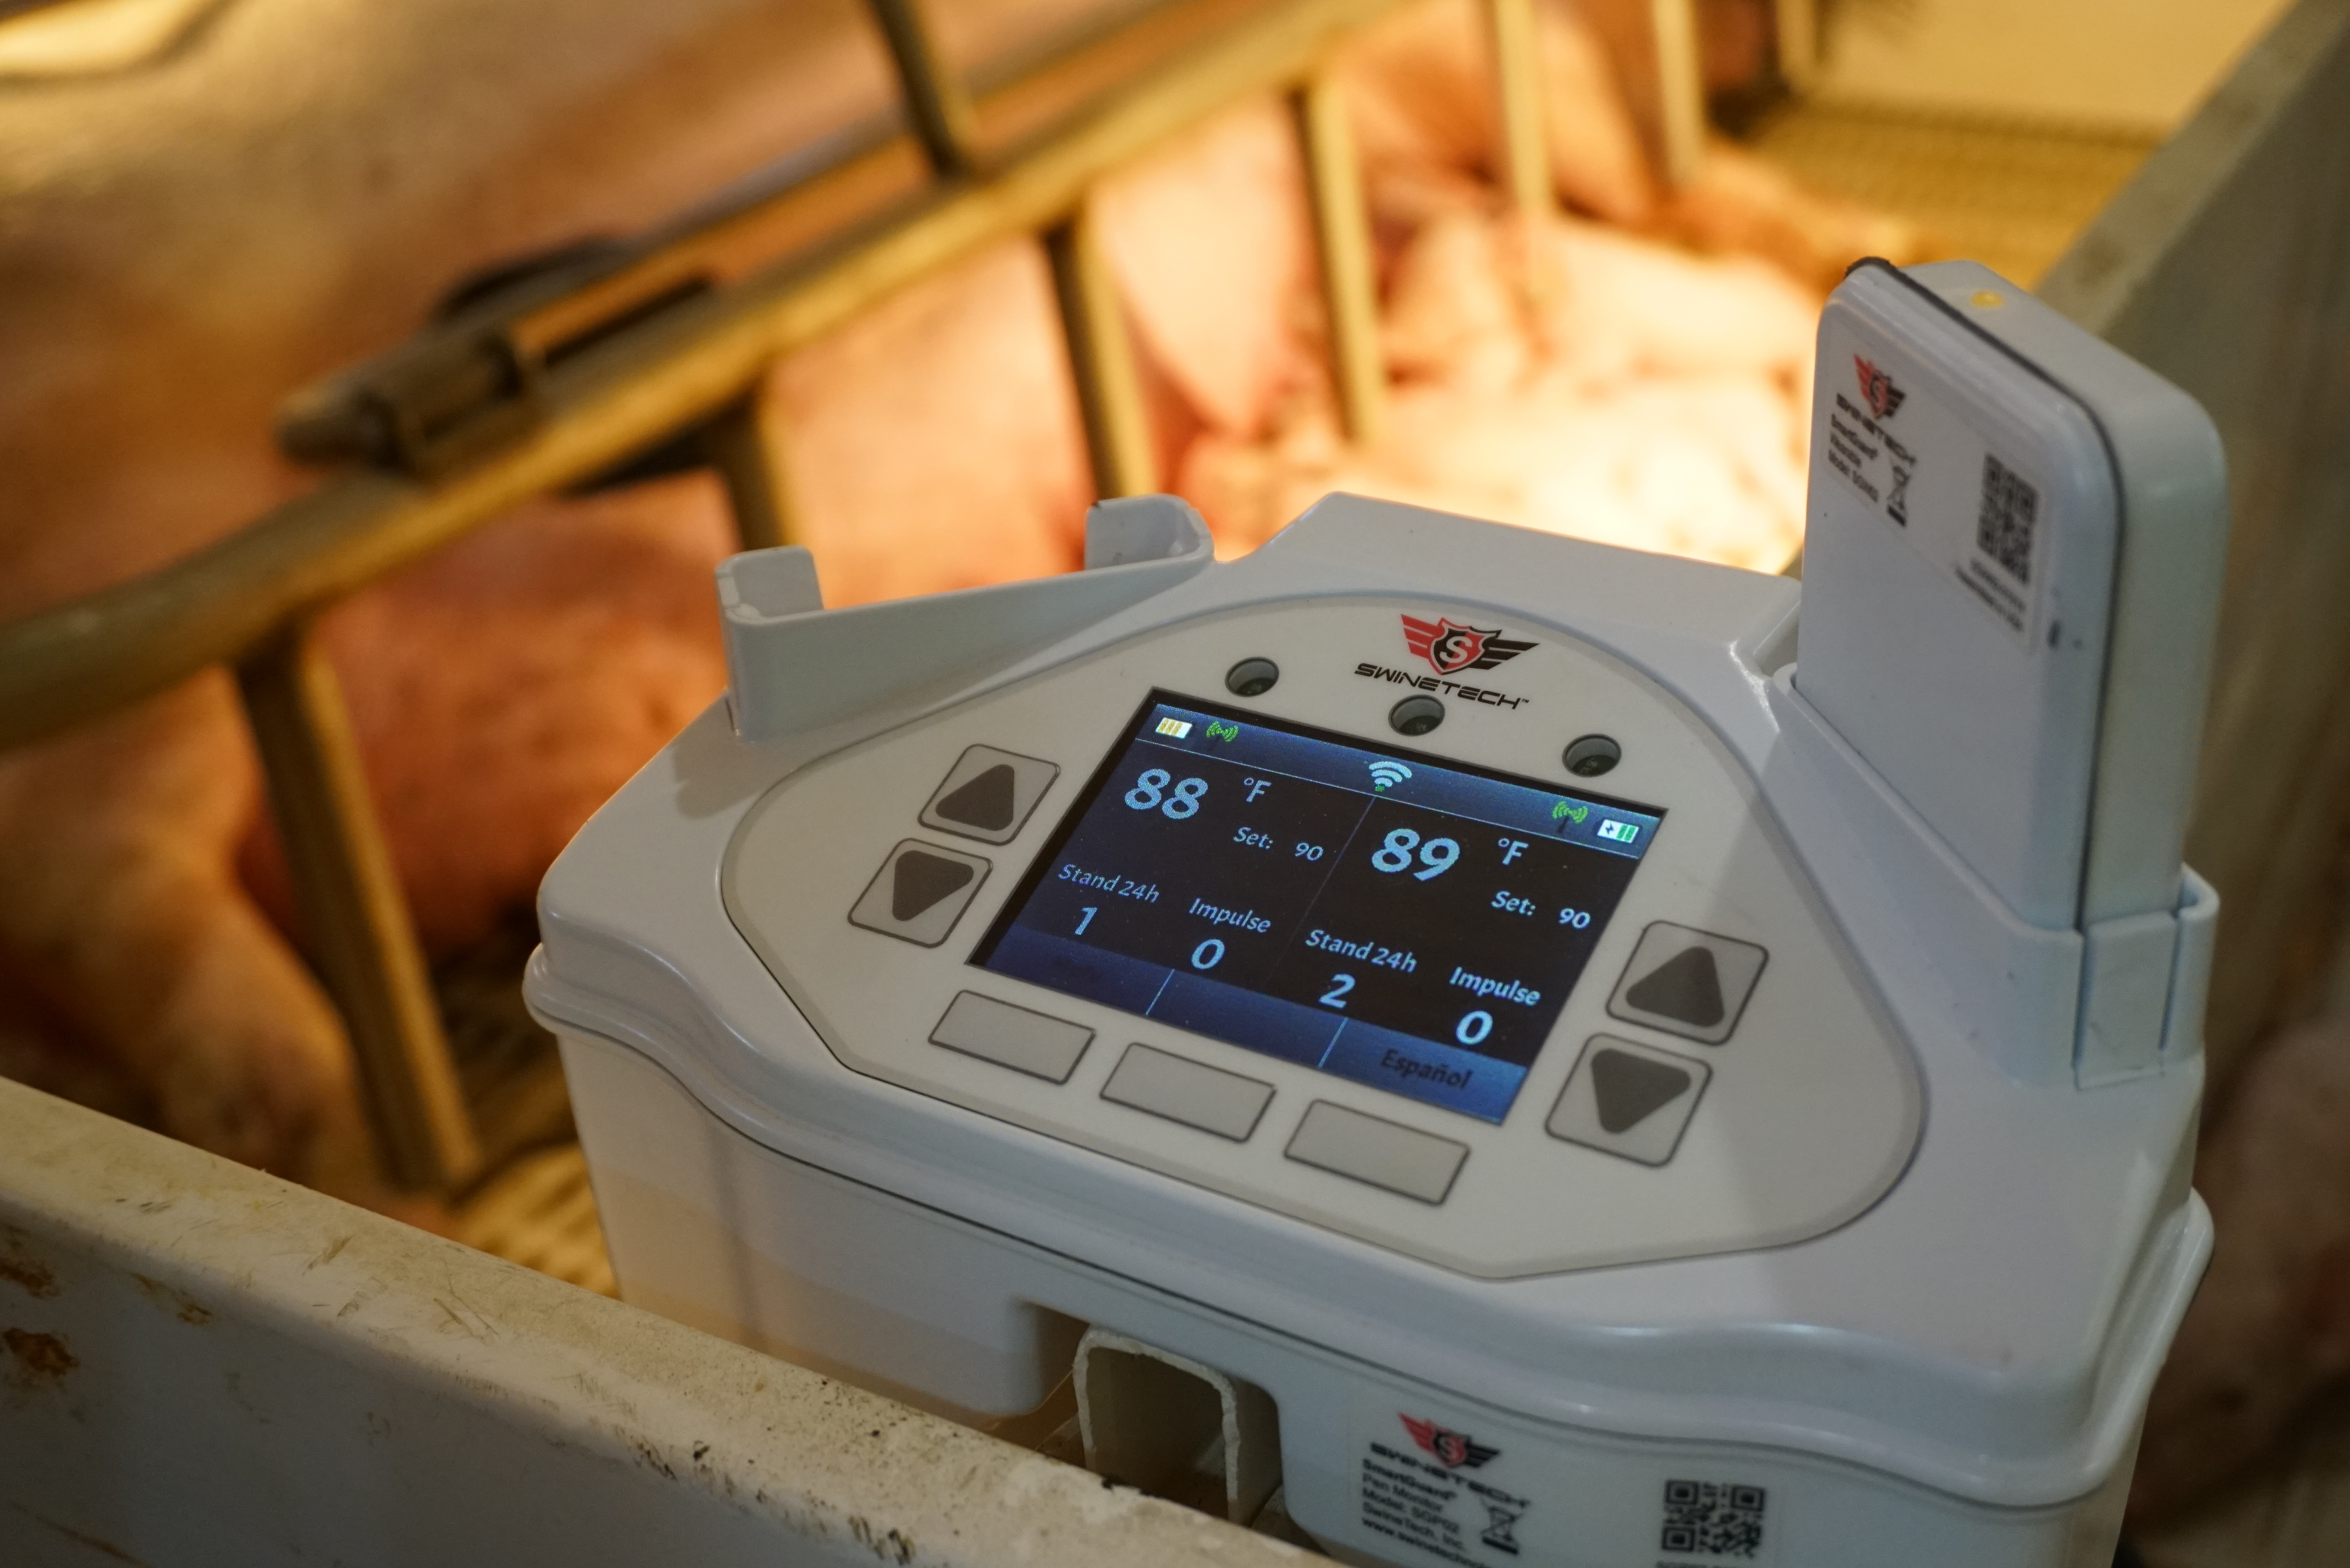 SwineTech’s award-winning product, SmartGuard, prevents piglet deaths caused by crushing